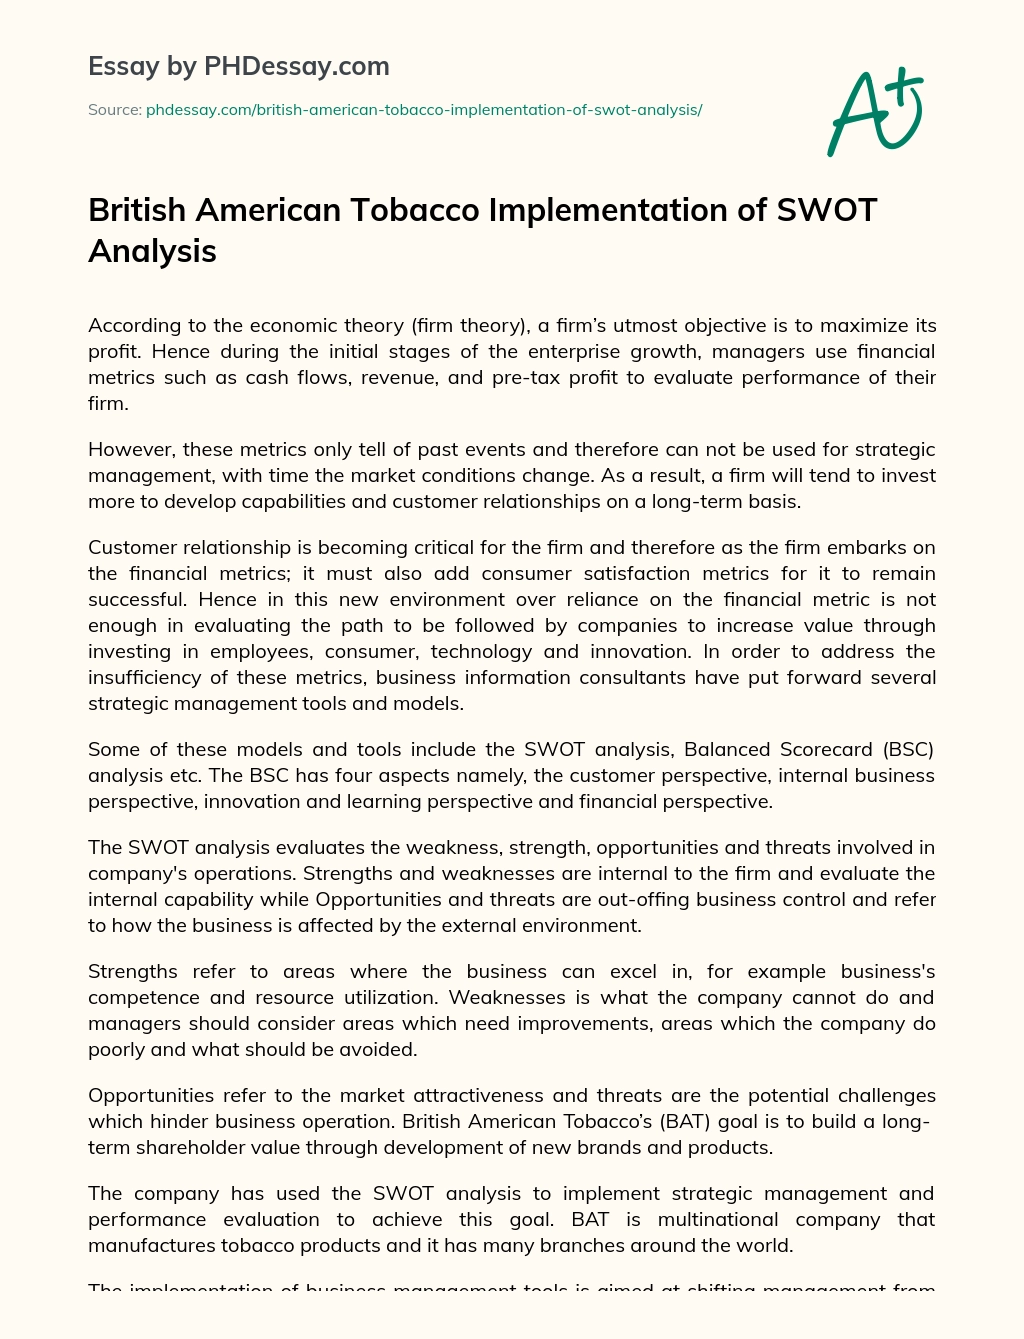 British American Tobacco Implementation of SWOT Analysis essay